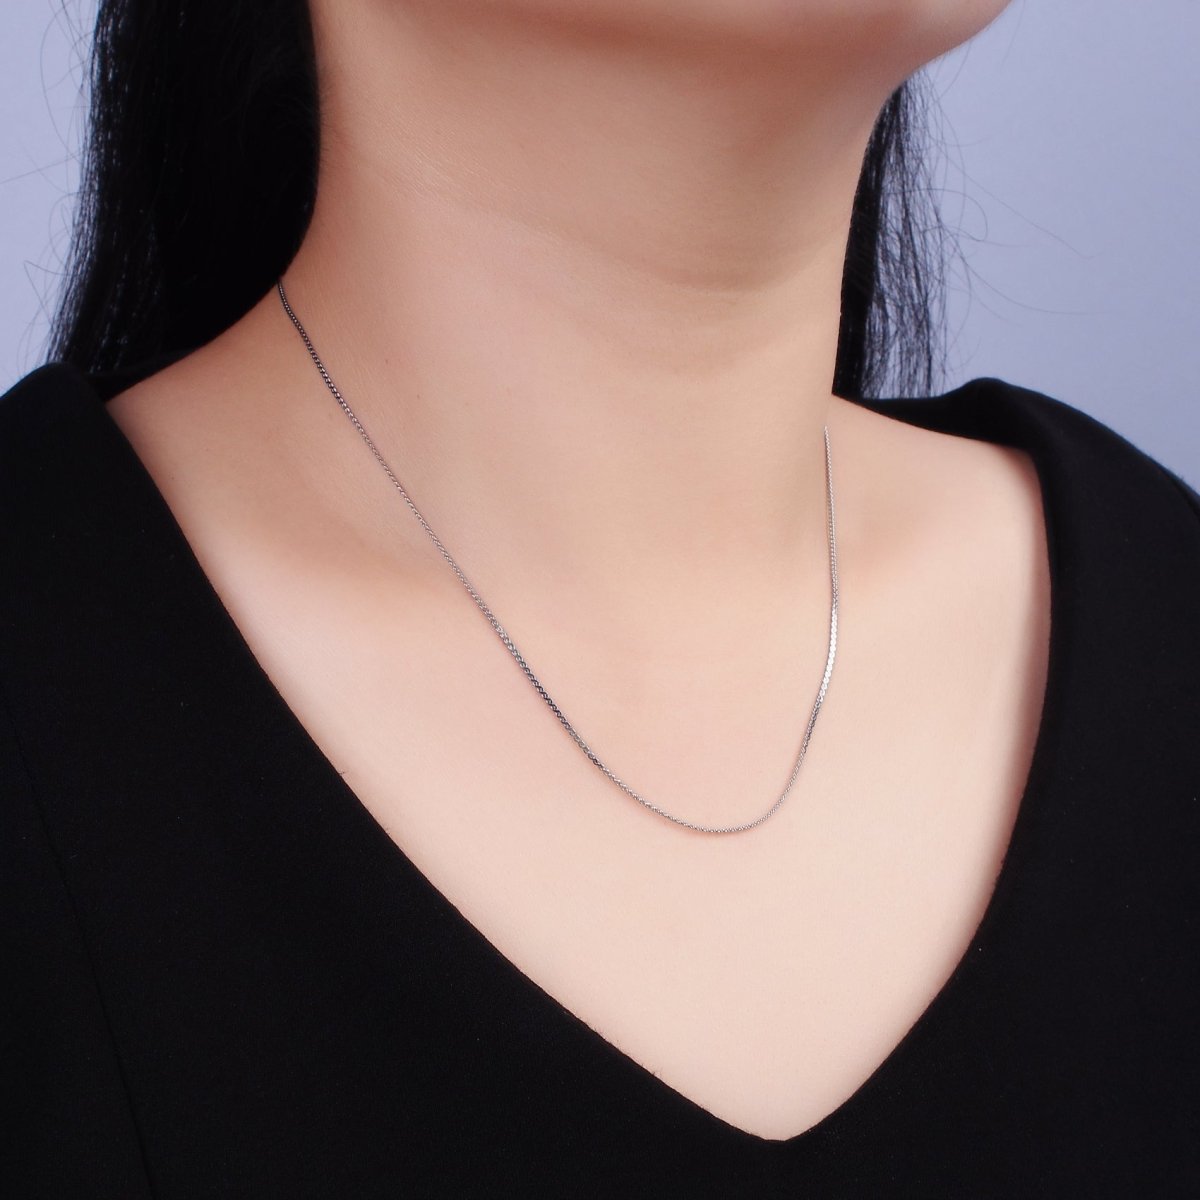 Dainty Nugget Tinsel Serpentine Chain Necklace for Women Stainless Steel Necklace 18 inch long | WA-2104 Clearance Pricing - DLUXCA